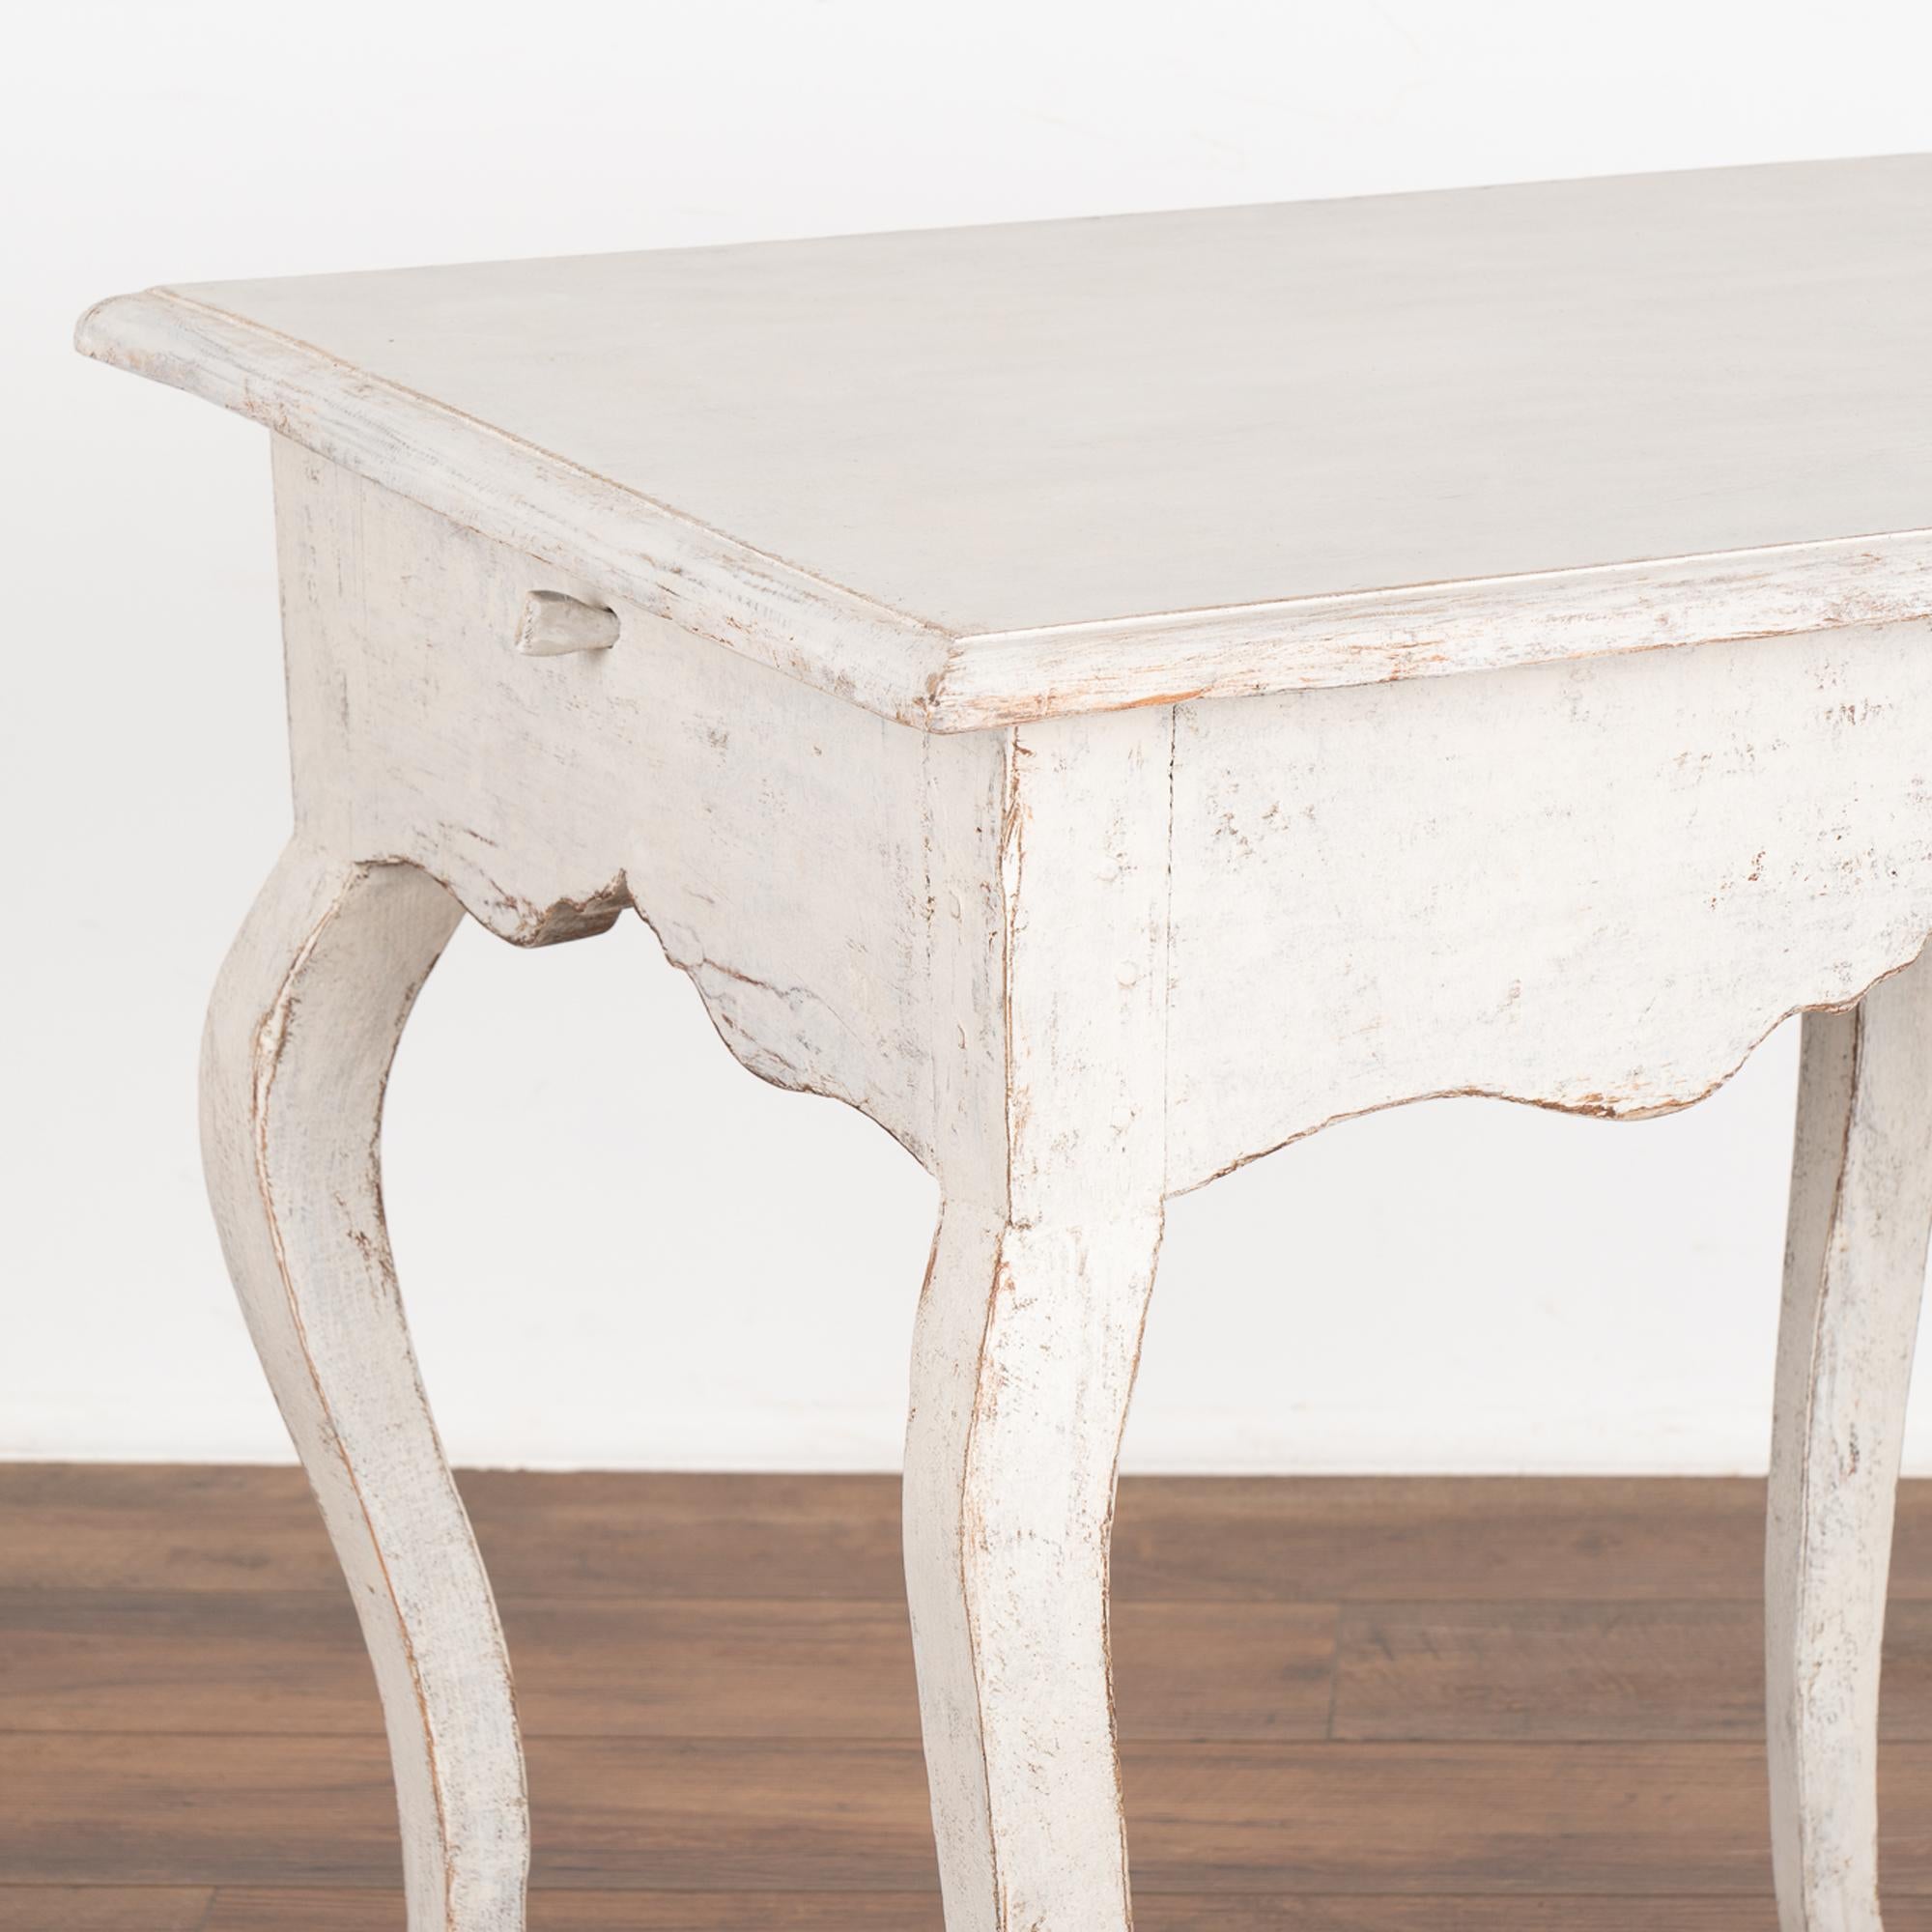 19th Century White Gustavian Side Table with Cabriolet Legs, Sweden circa 1800-20 For Sale